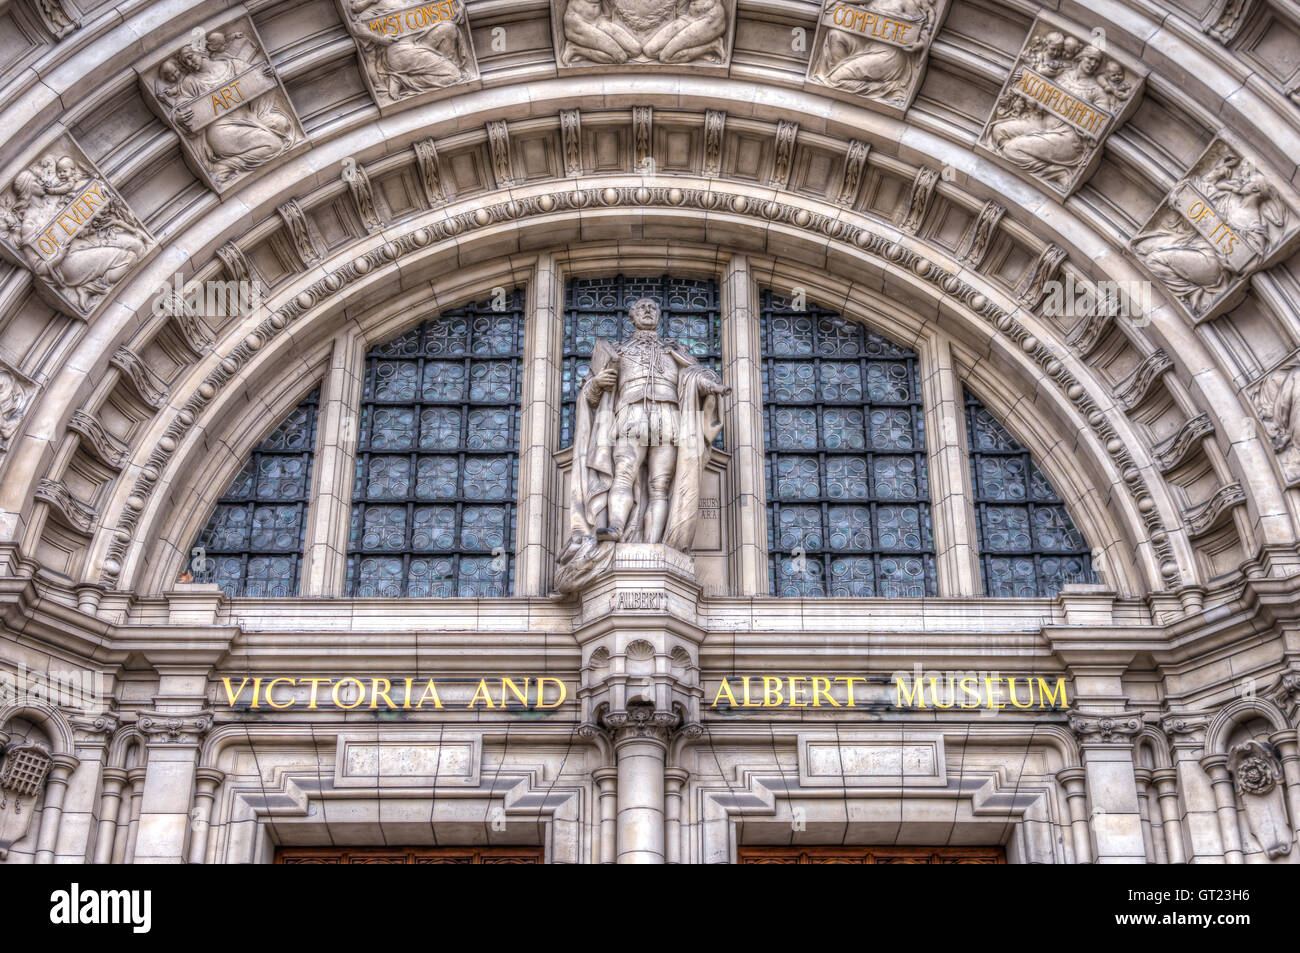 Front entrance of the Vicotria and Albert Museum in South Kensington London, UK Stock Photo